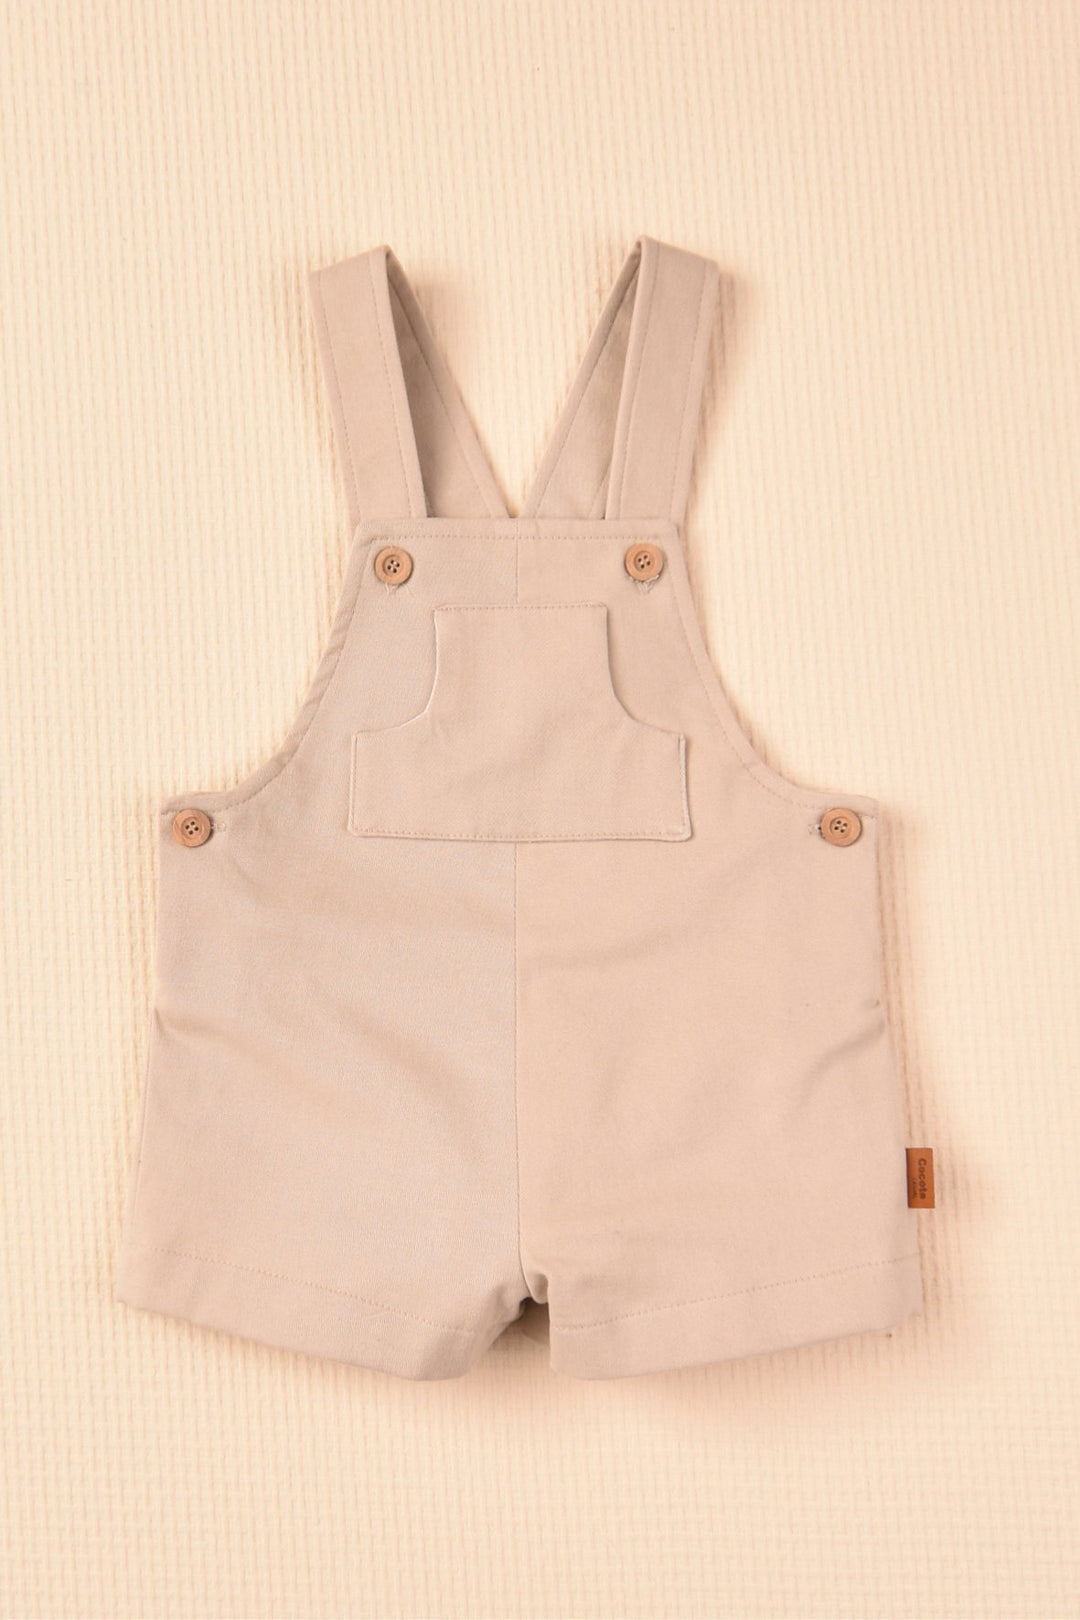 Cocote "Andrés" Brushed Cotton Dungarees | Millie and John